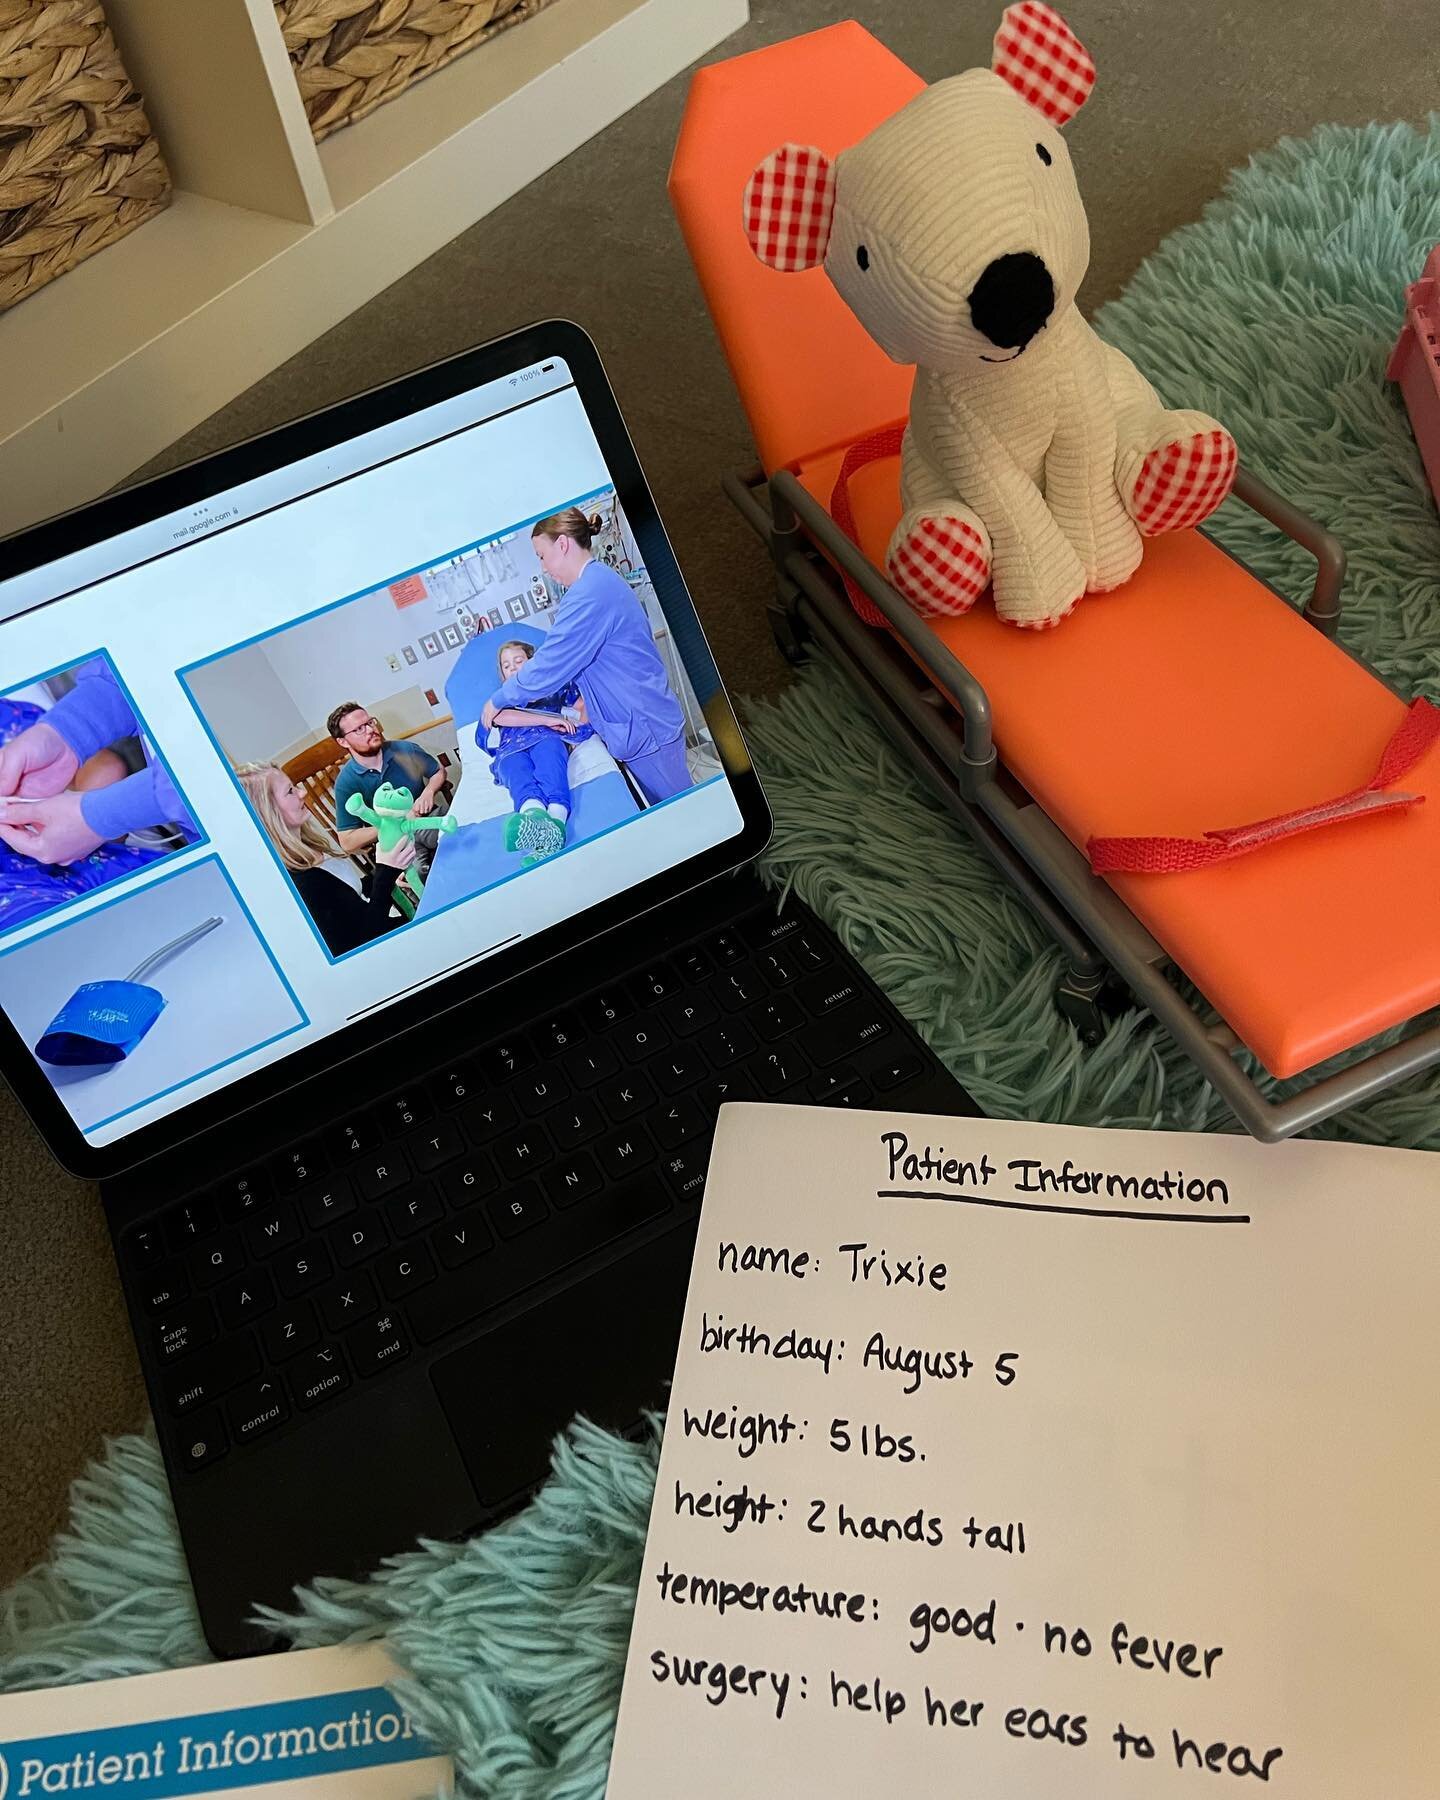 Trixie the Bear learns all about having surgery 🏥 She learned about &ldquo;the fixing room&rdquo;&hellip; the mask for sleepy medicine&hellip; and all of the important patient information the doctors and nurses need to keep her safe! #preparation #c